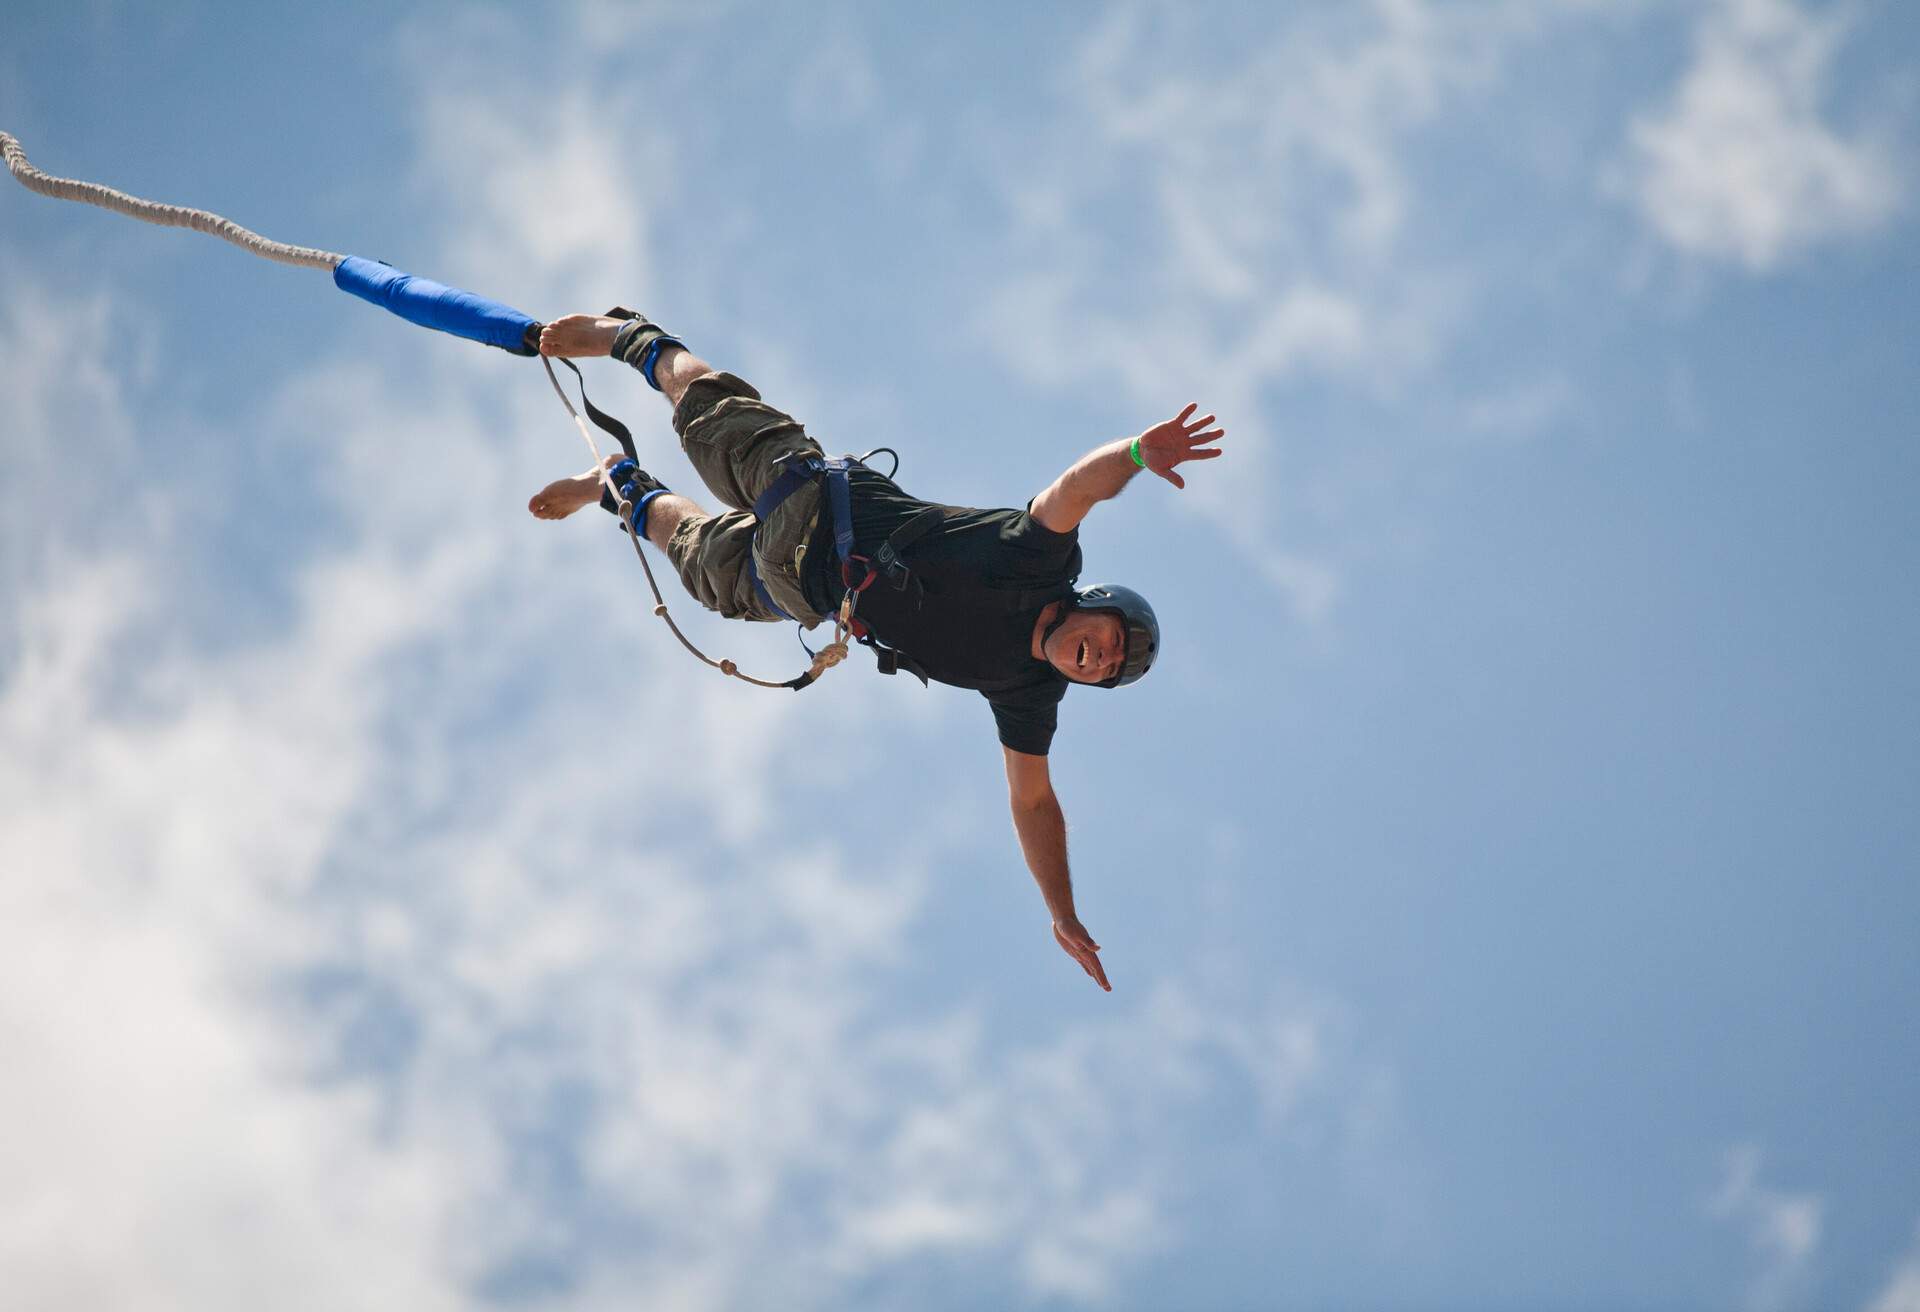 A man in a helmet bungee jumps while attached to a rope.